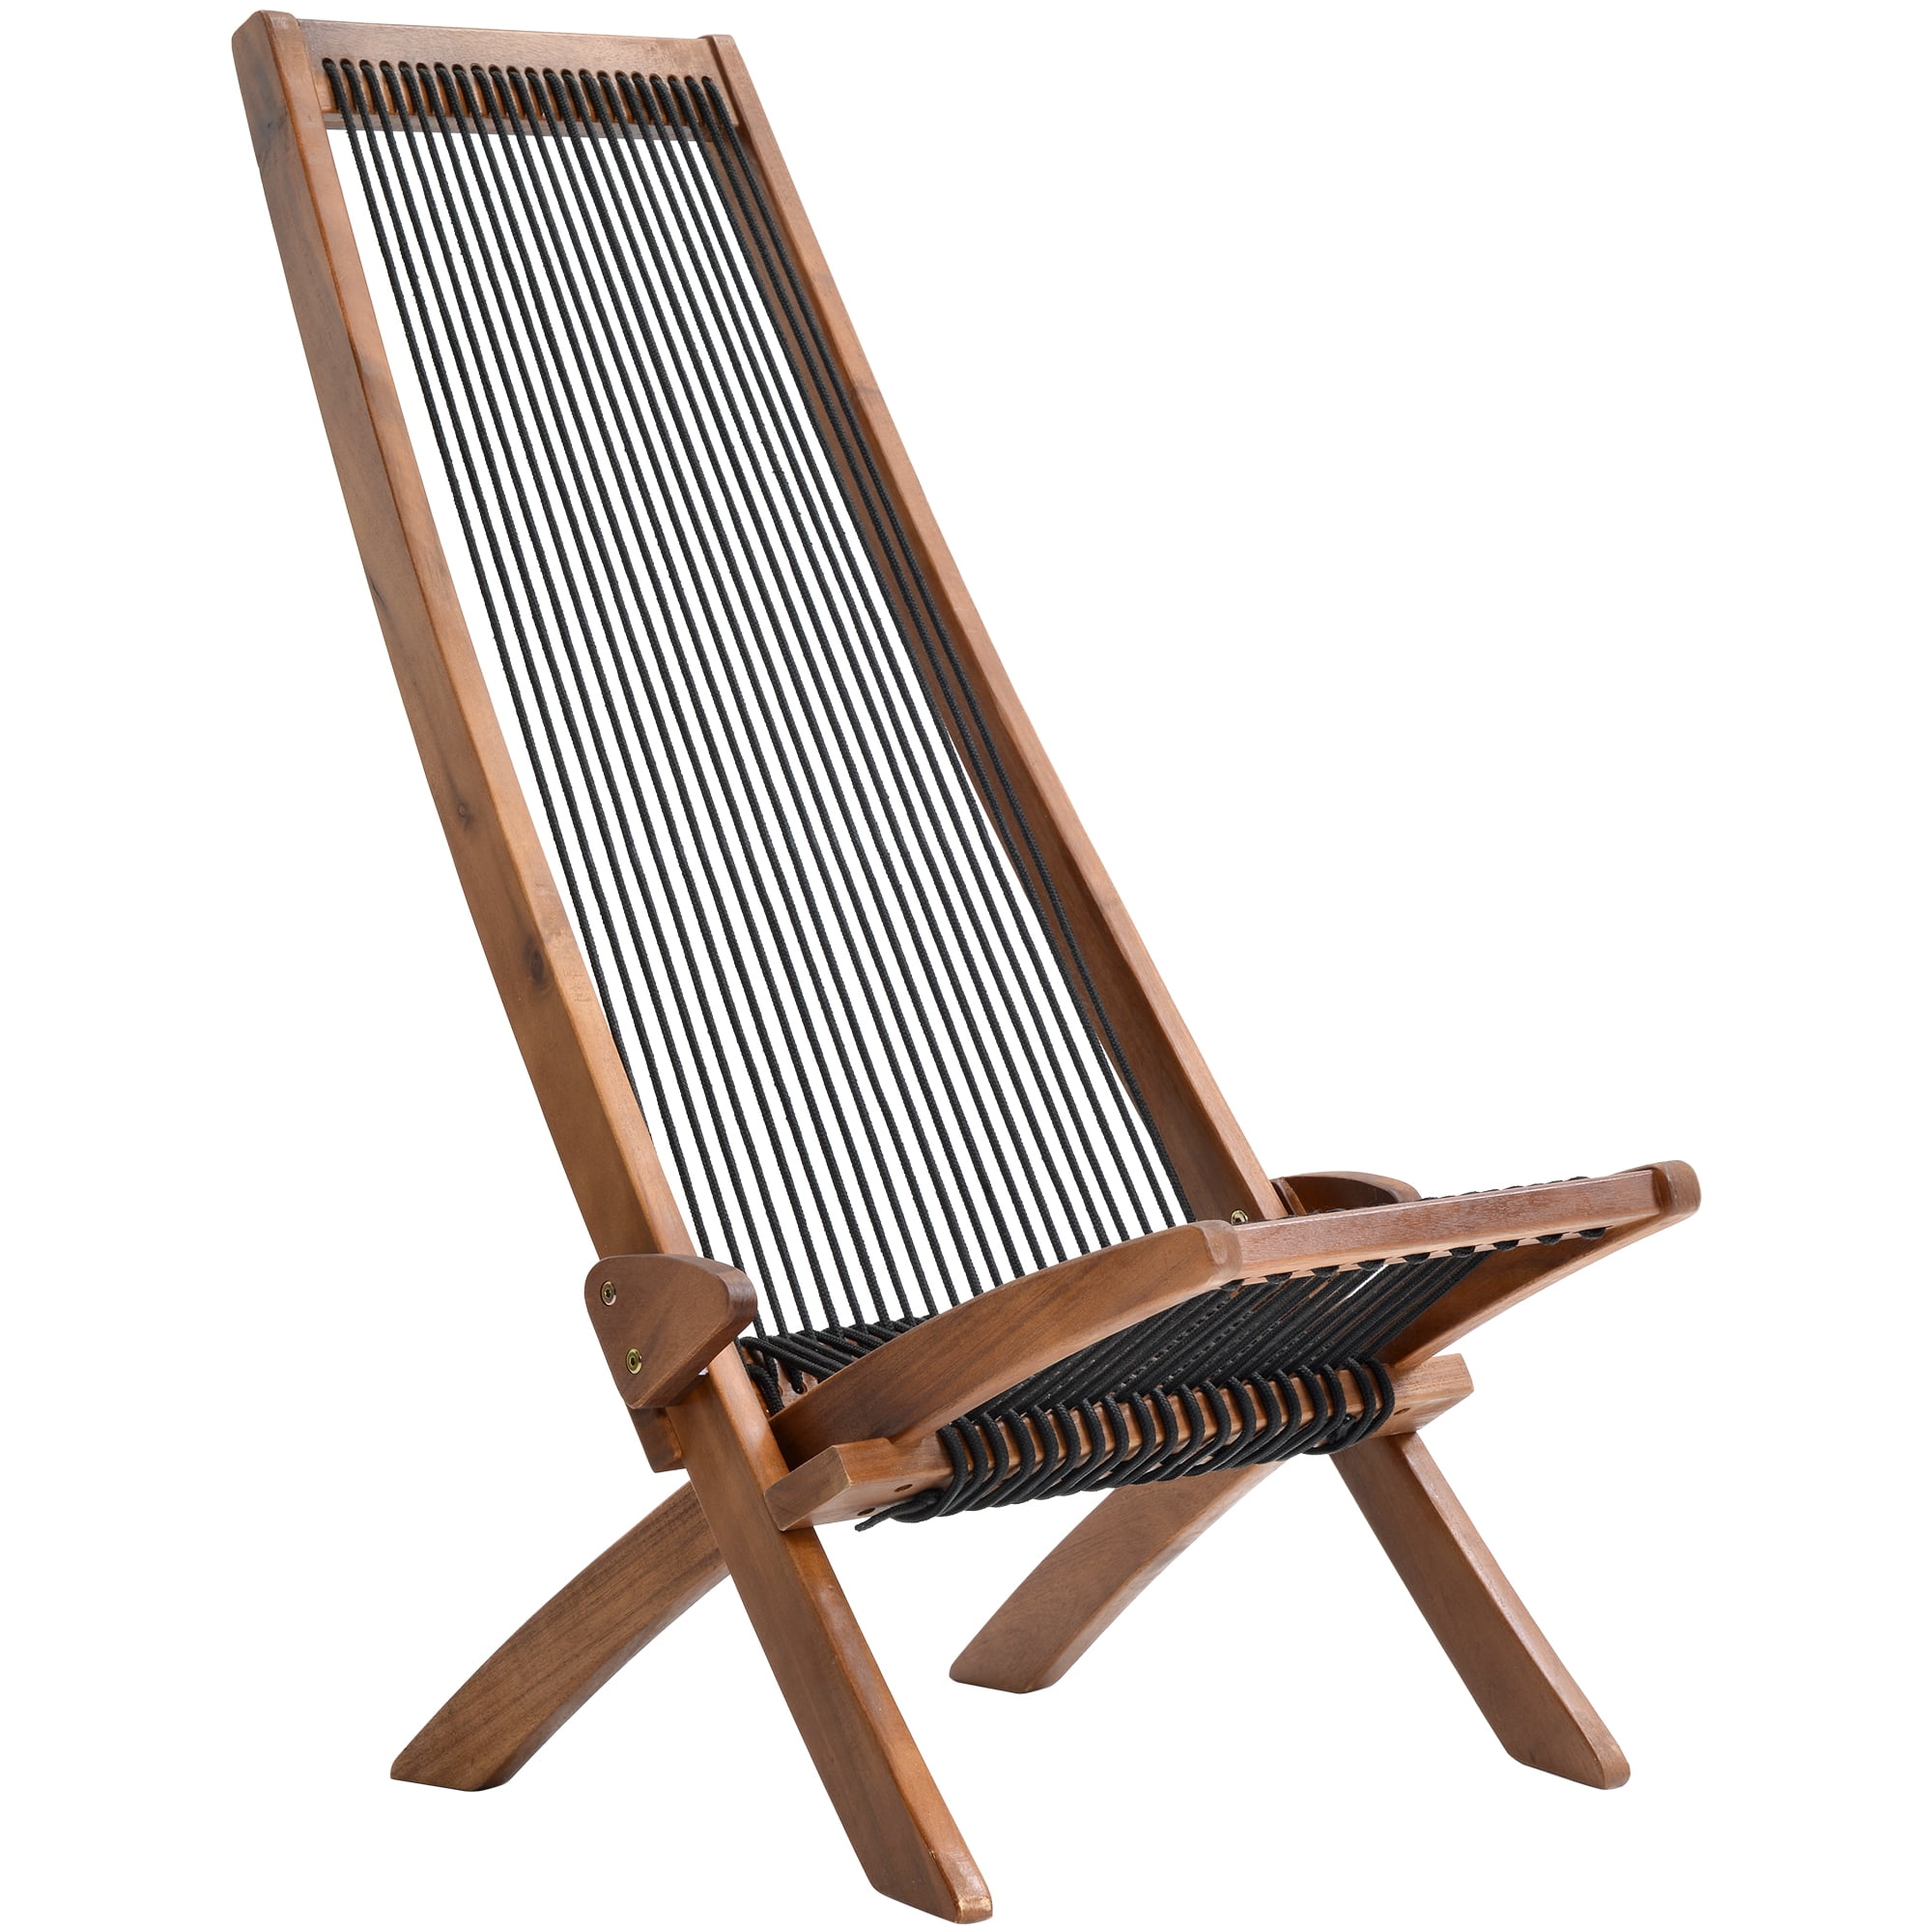 Folding Wood Chair Roping Seats, Outdoor Wood Chairs Folding